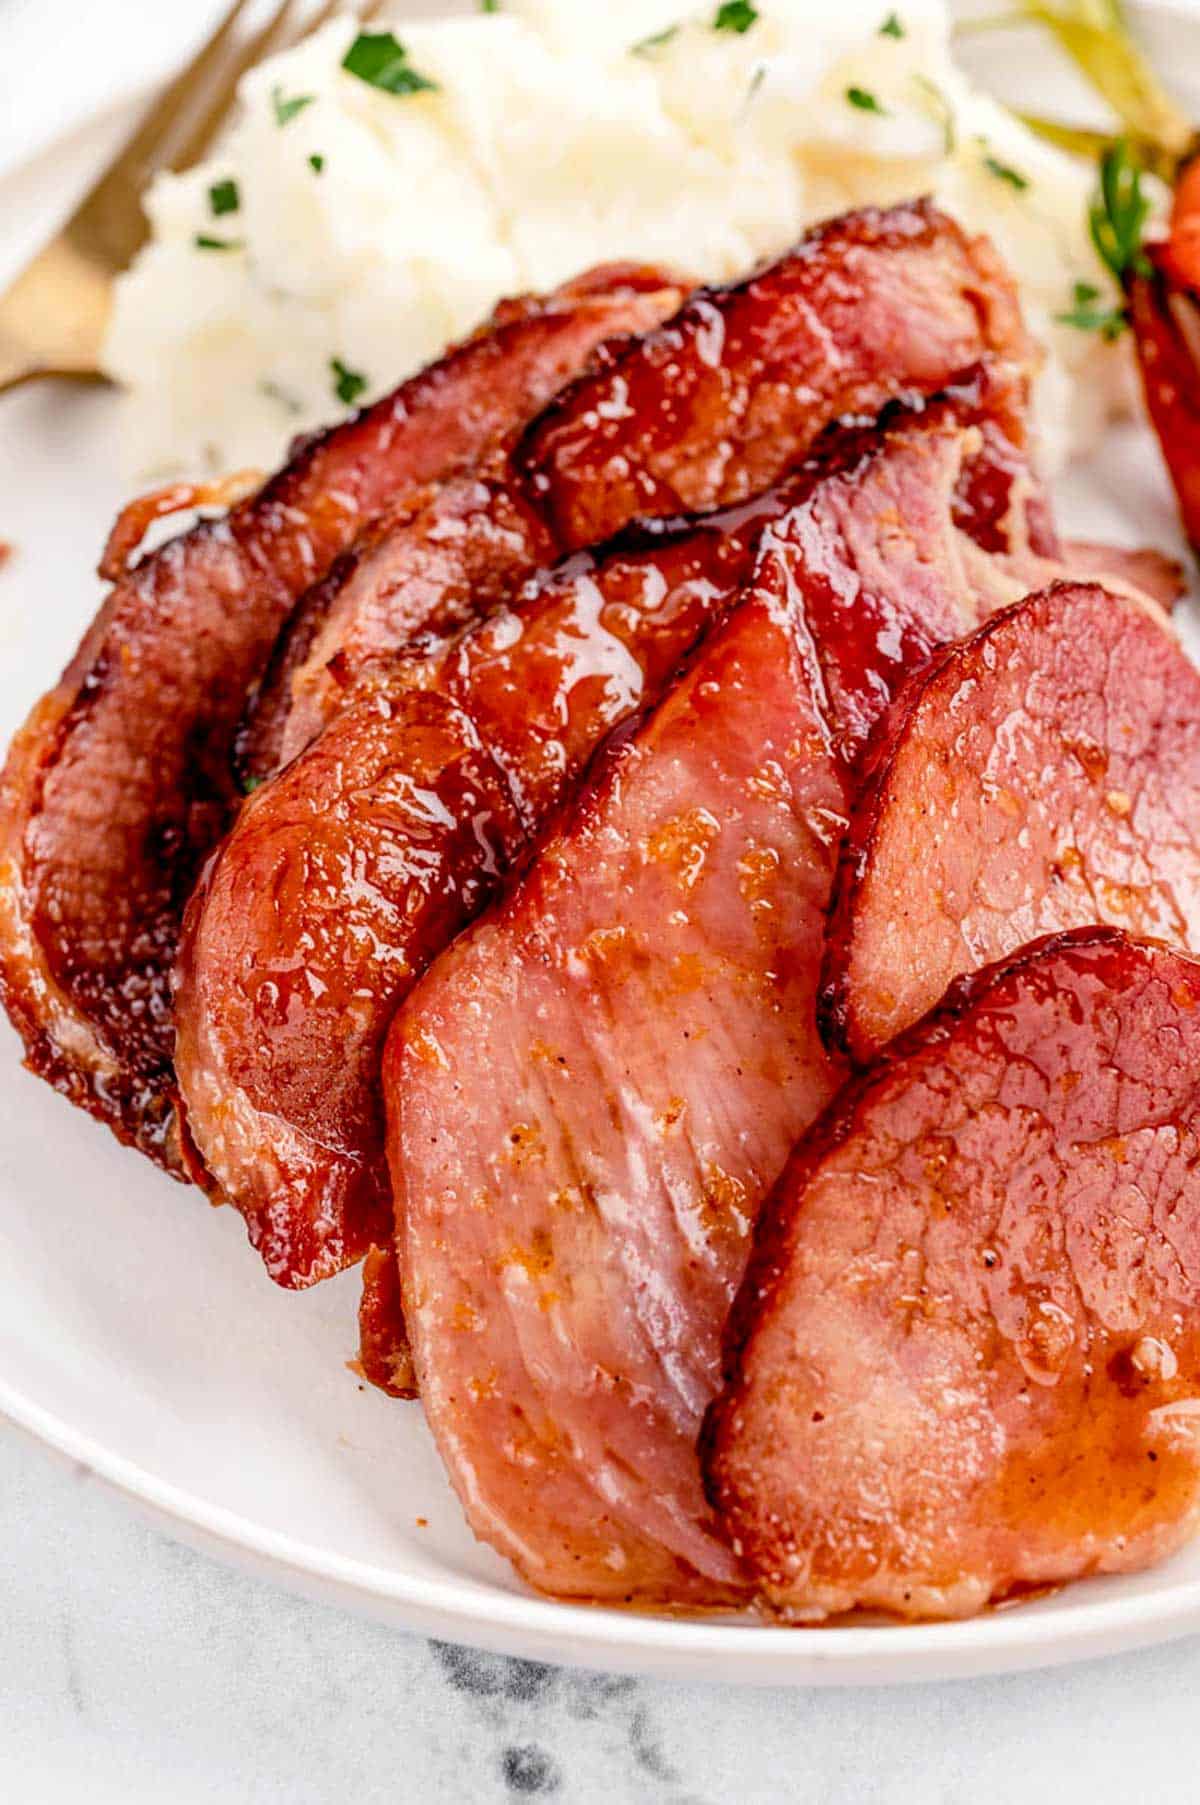 Up close image of glazed ham slices cut on a plate.